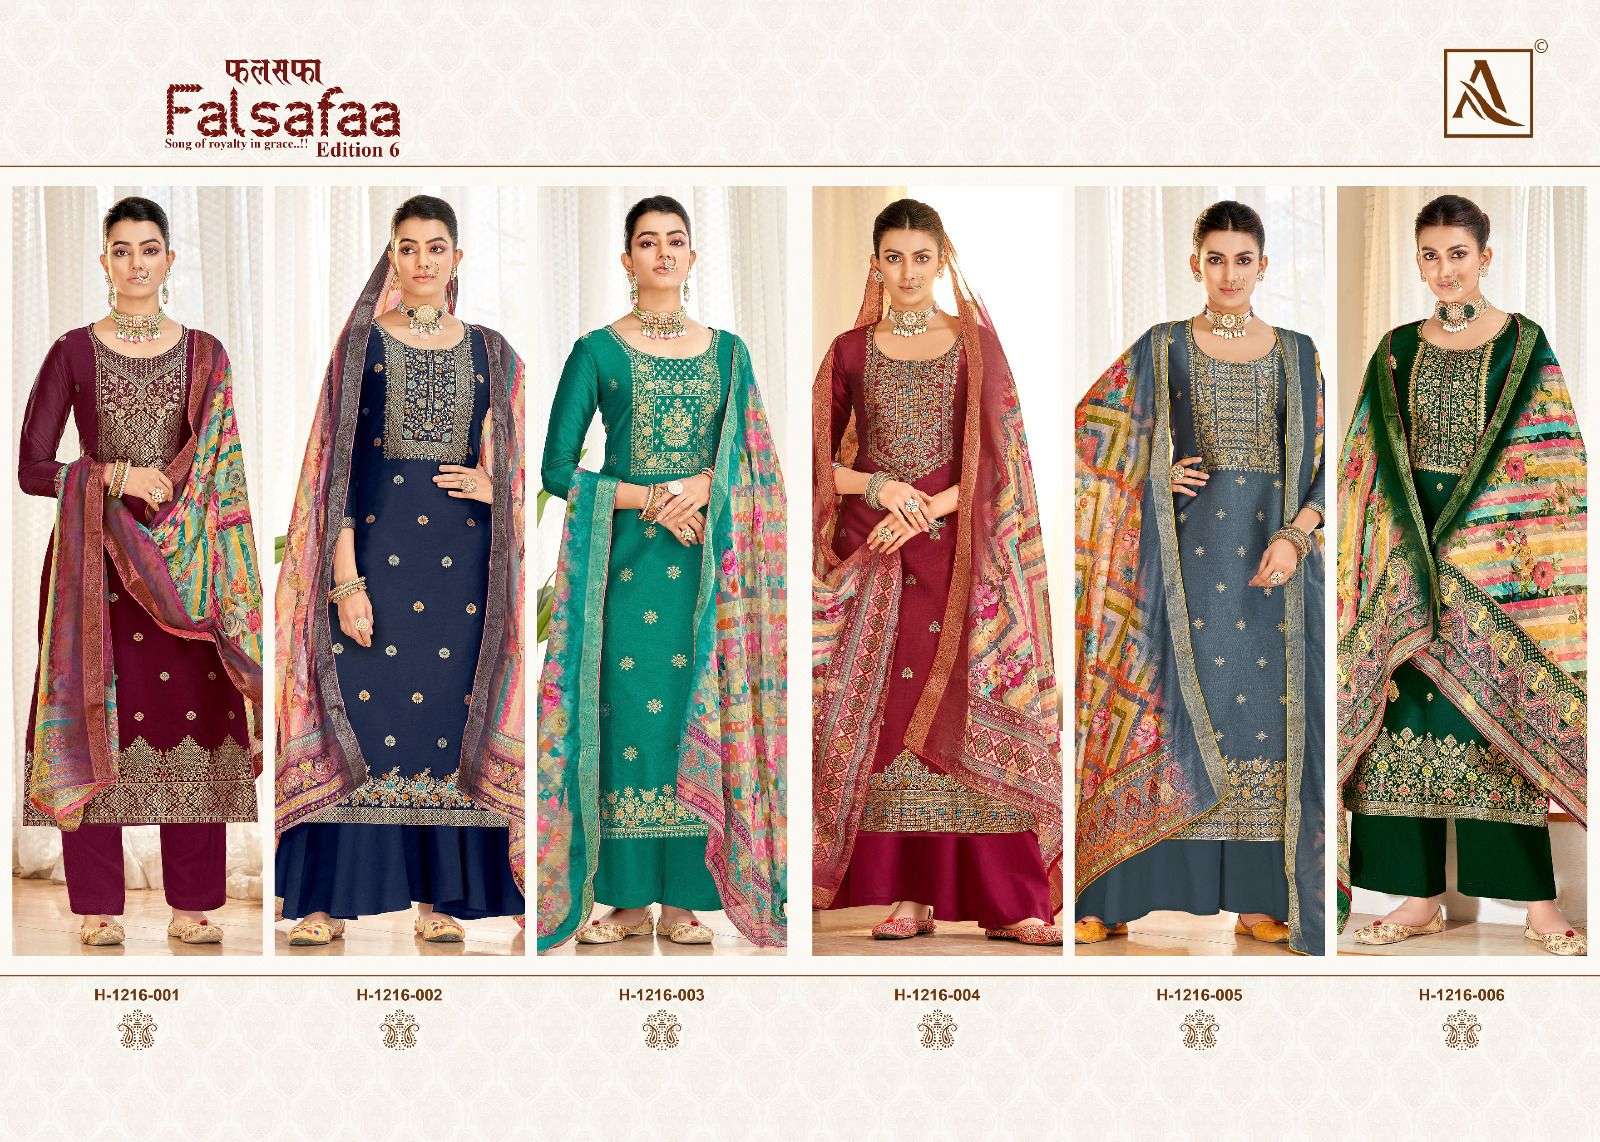 Alok Suit Falsafaa Edition 1216-001 to 1216-006